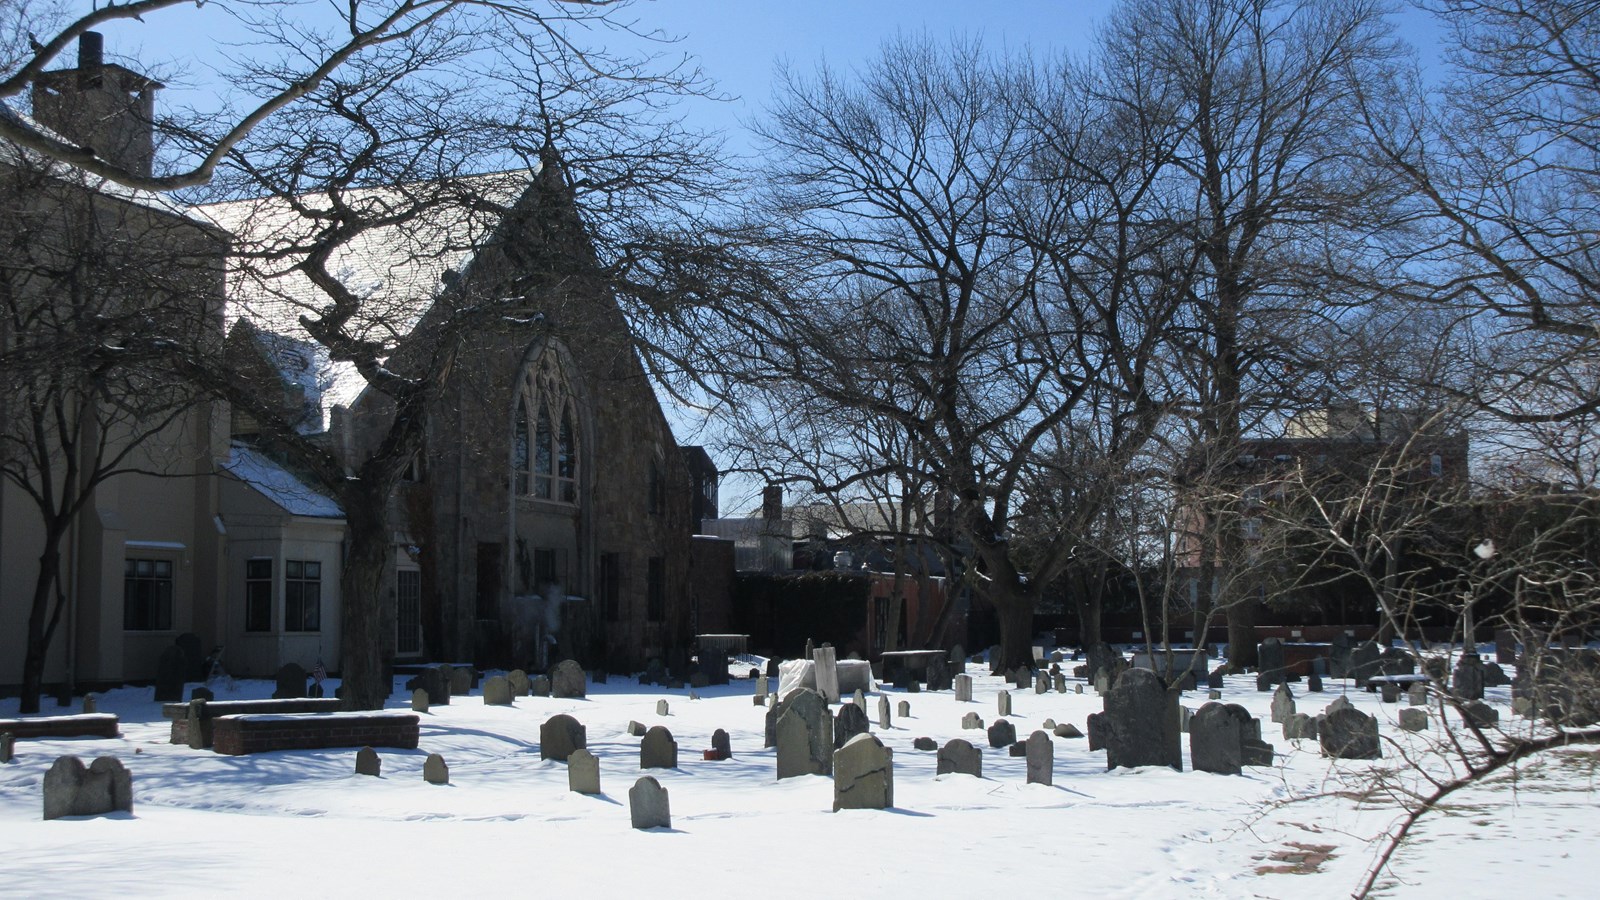 gravestones of various sizes and styles fill open space covered in snow, with church at left